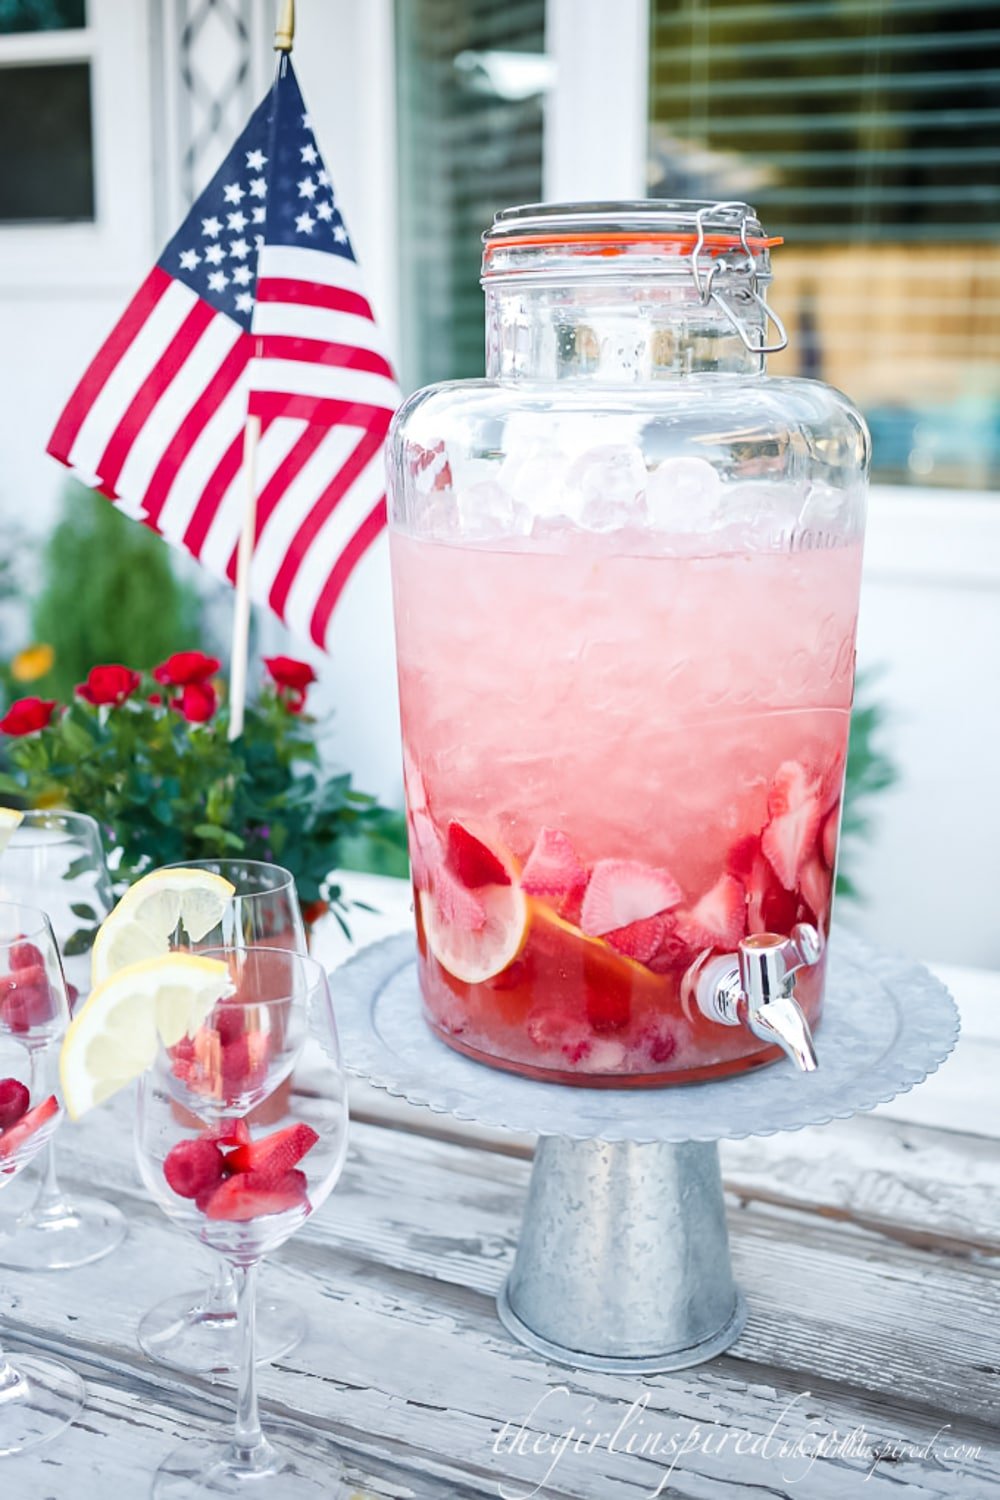 strawberry sangria in large glass drink dispenser on pedestal stand, lemon wedges and fresh berries in wine glasses on table and American flag in the background